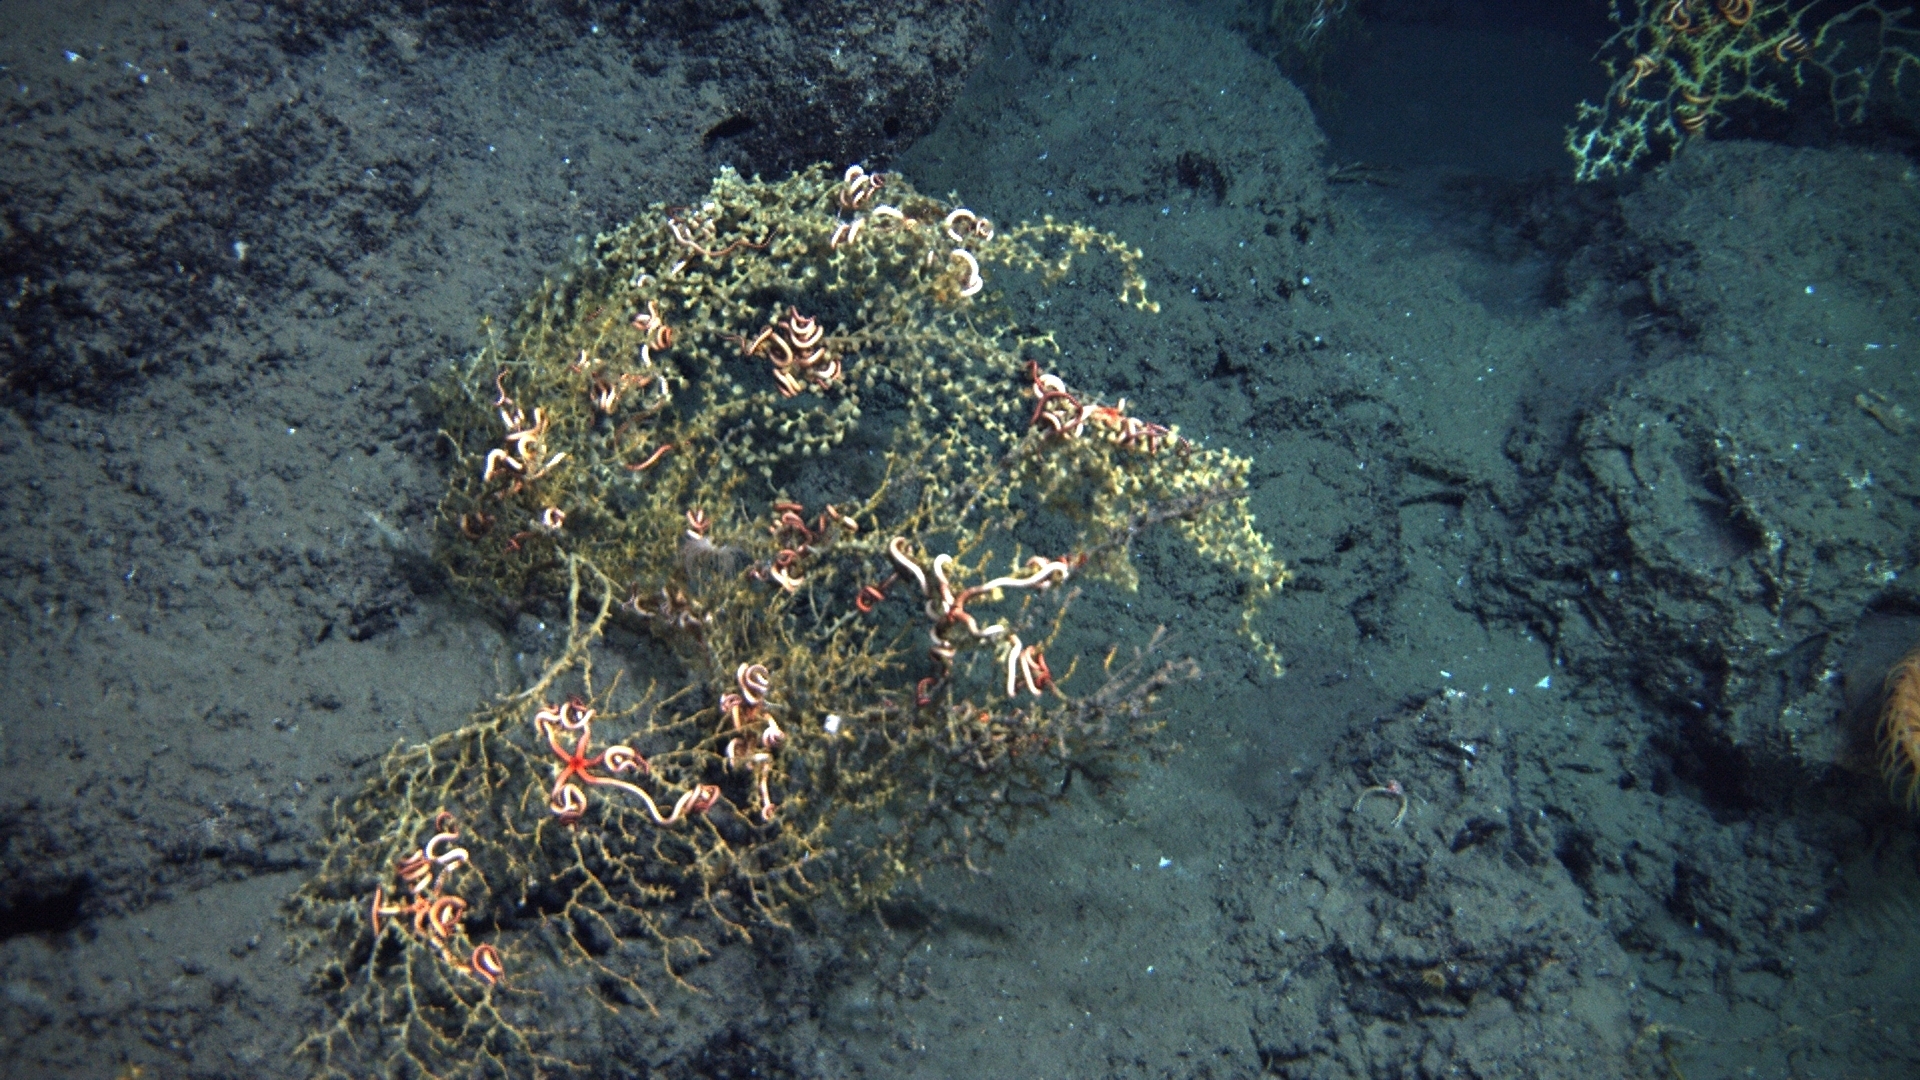 Photograph of deep-sea corals full of brittle stars, but surrounded by an area covered in floc from the Deepwater Horizon oil spill